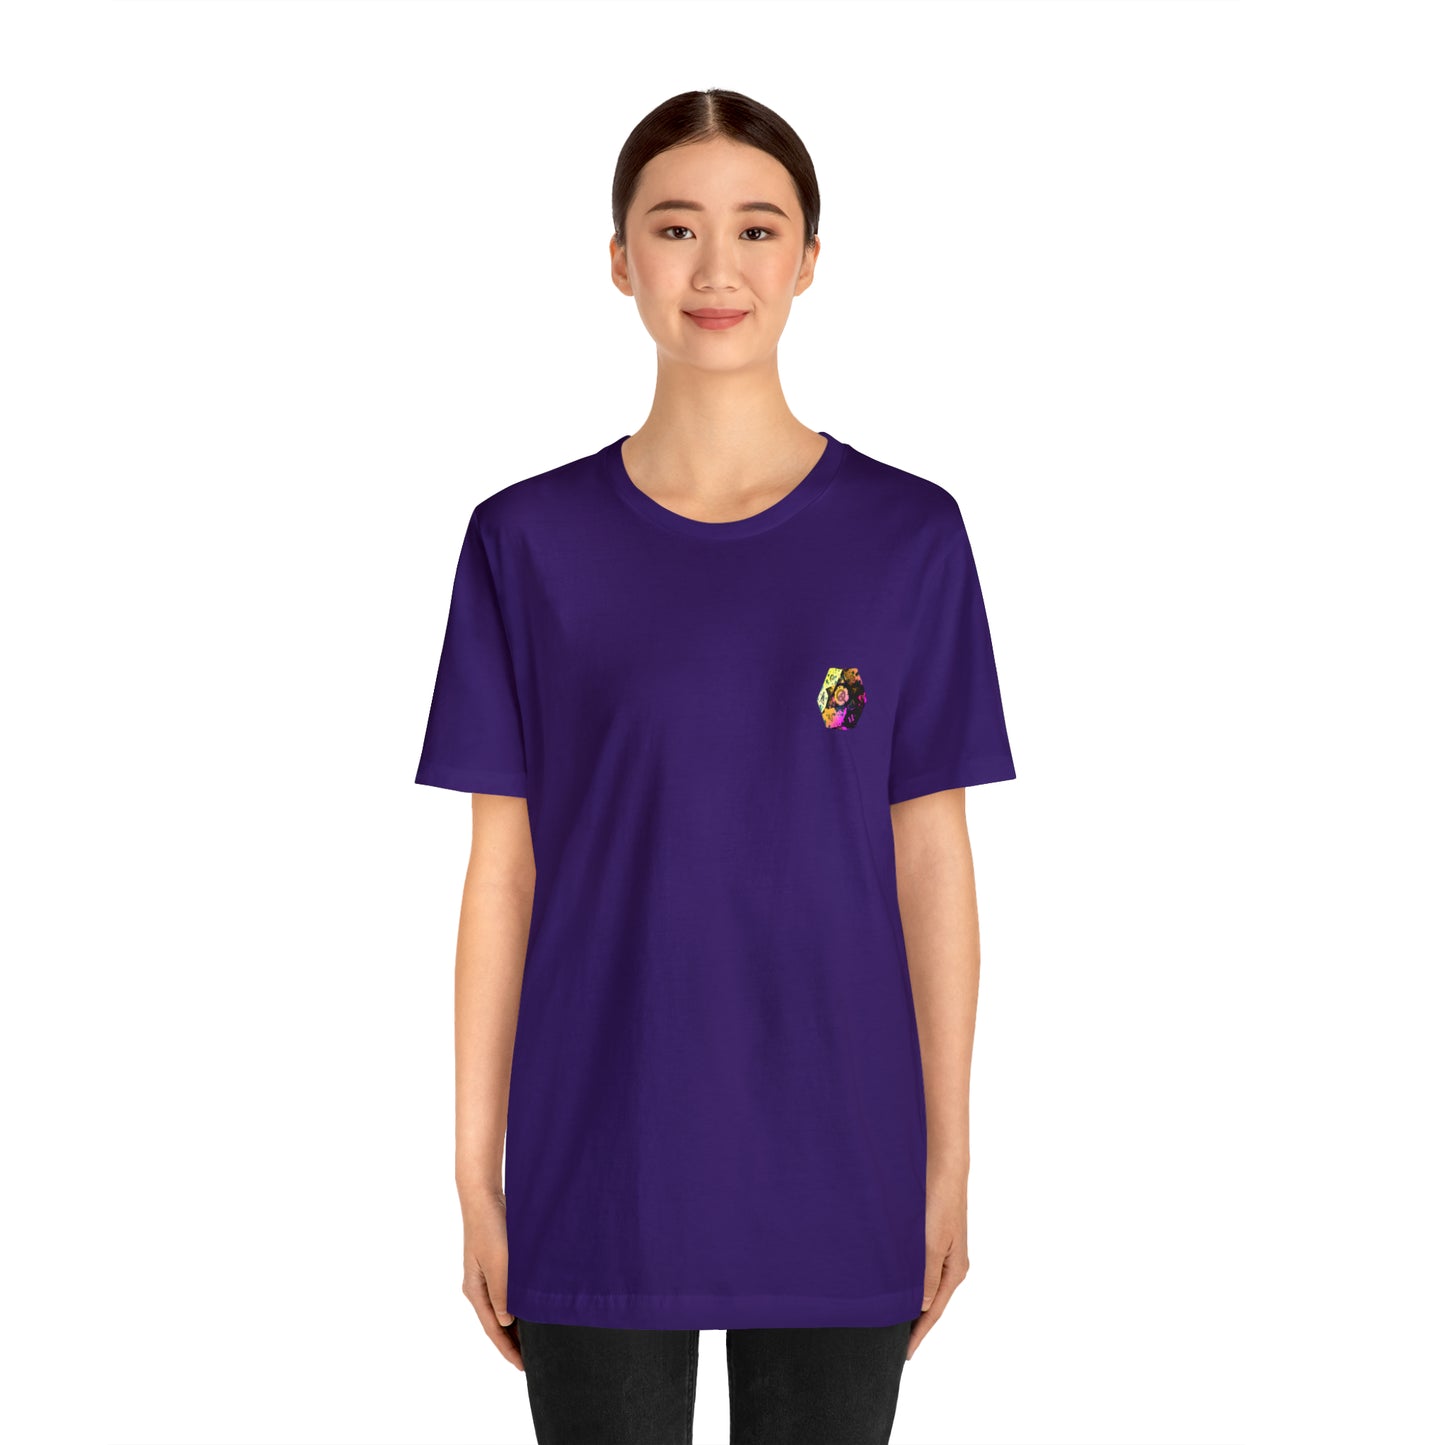 team-purple-quest-thread-tee-shirt-with-small-neon-splatter-d20-dice-on-left-chest